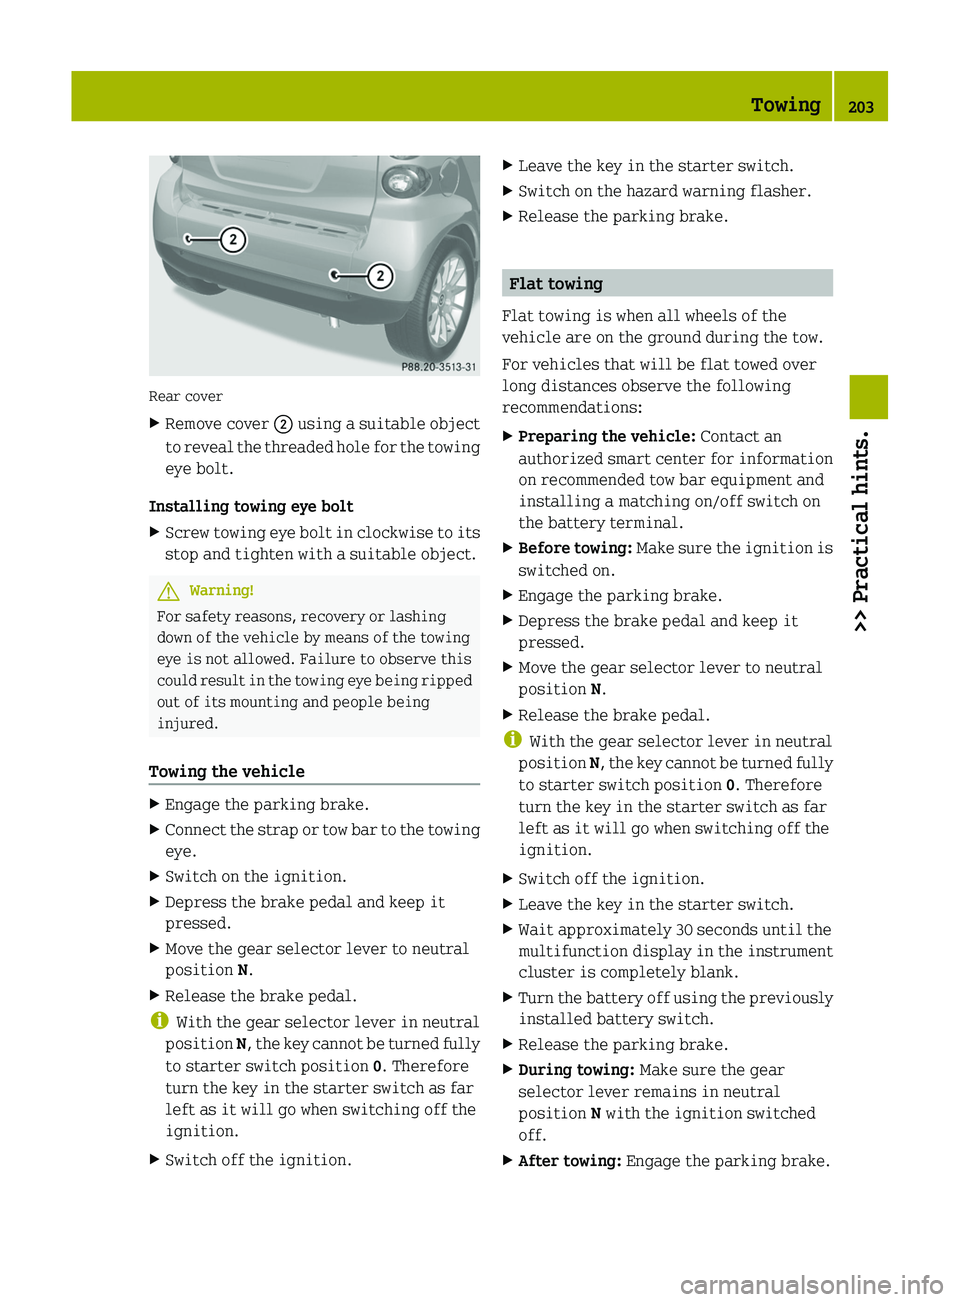 SMART FORTWO COUPE 2011  Owners Manual Rear cover
XRemove cover \000G using a suitable object
to reveal the threaded hole for the towing
eye bolt.
Installing towing eye bolt
XScrew towing eye bolt in clockwise to its
stop and tighten with 